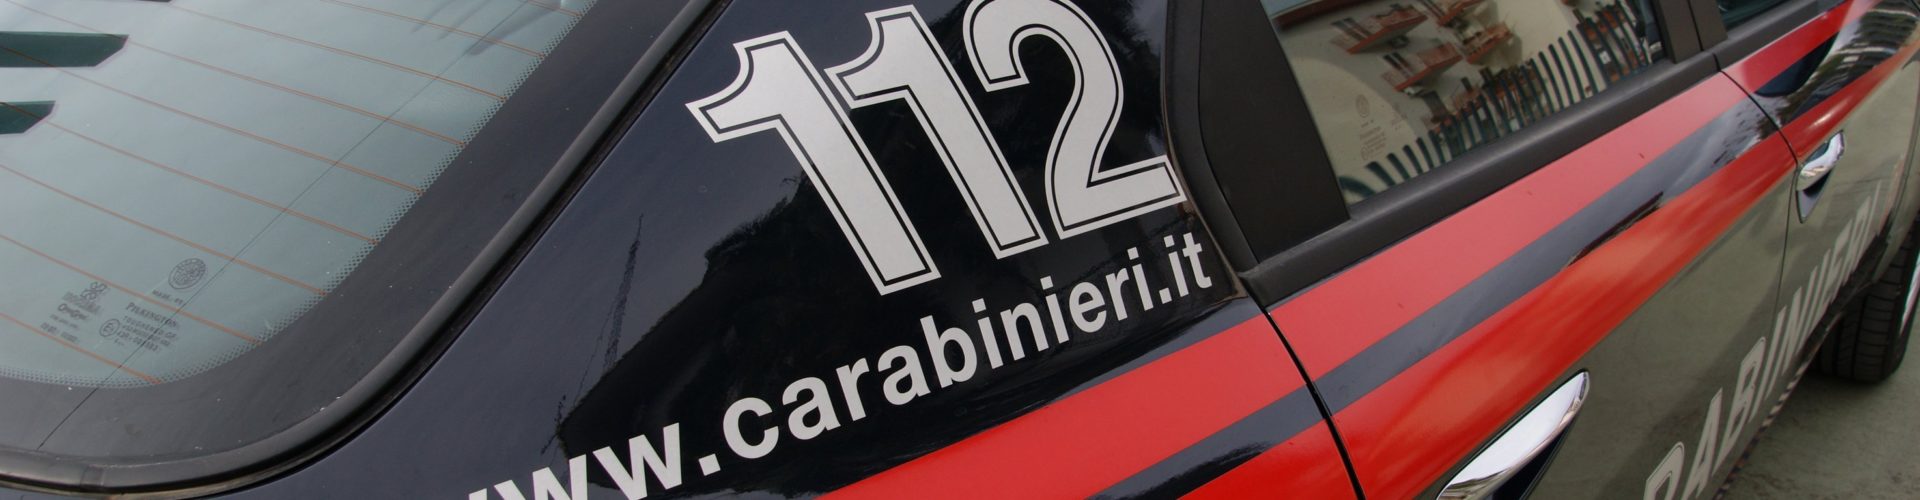 Italy: 26 arrested in Romanian sex trafficking ring